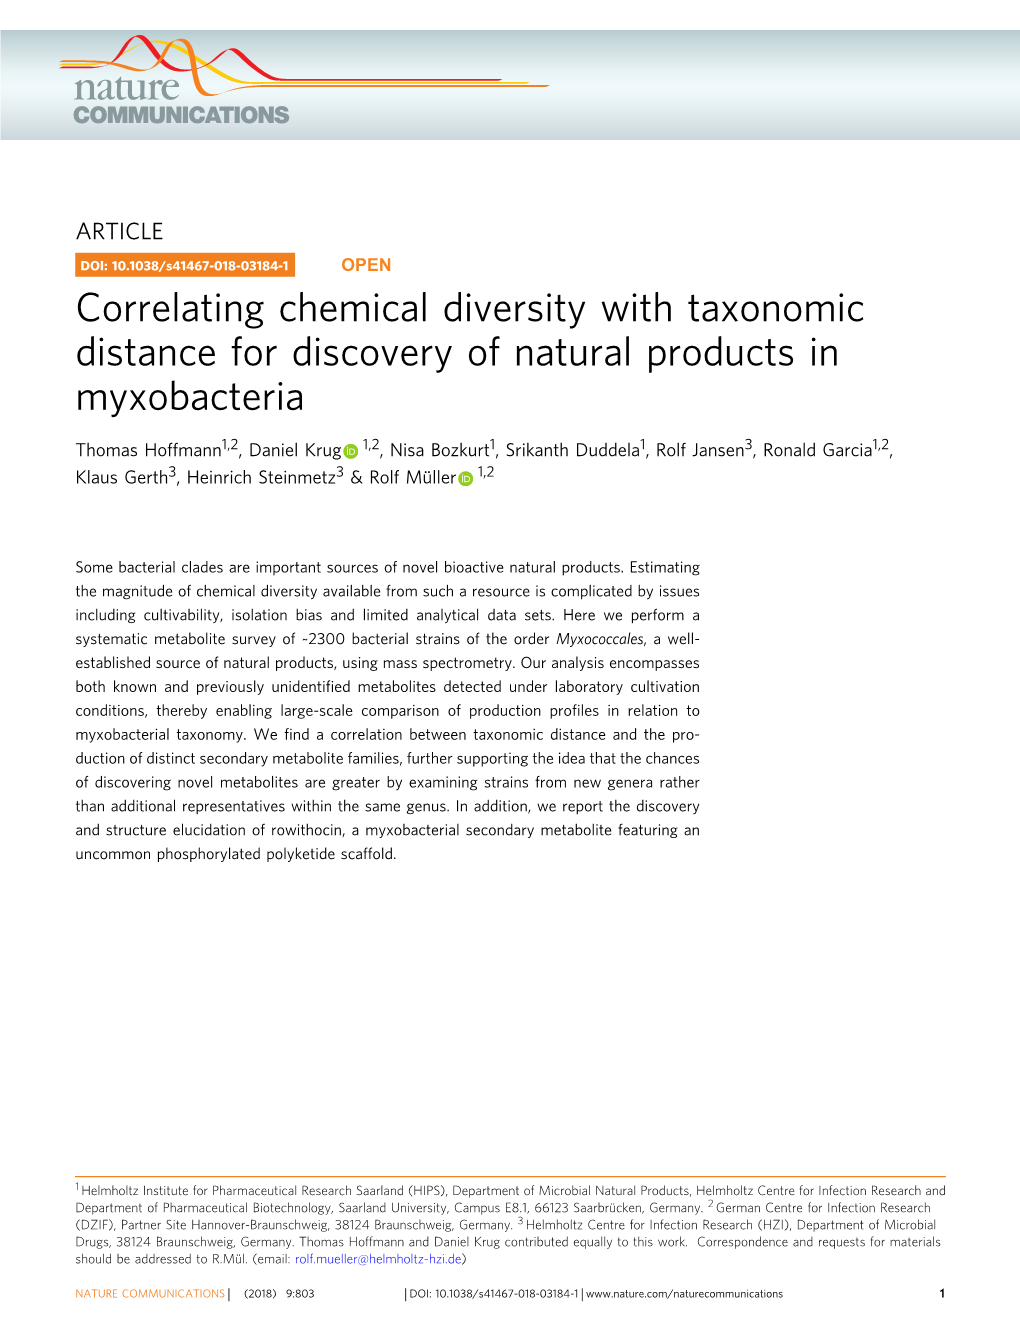 Correlating Chemical Diversity with Taxonomic Distance for Discovery of Natural Products in Myxobacteria